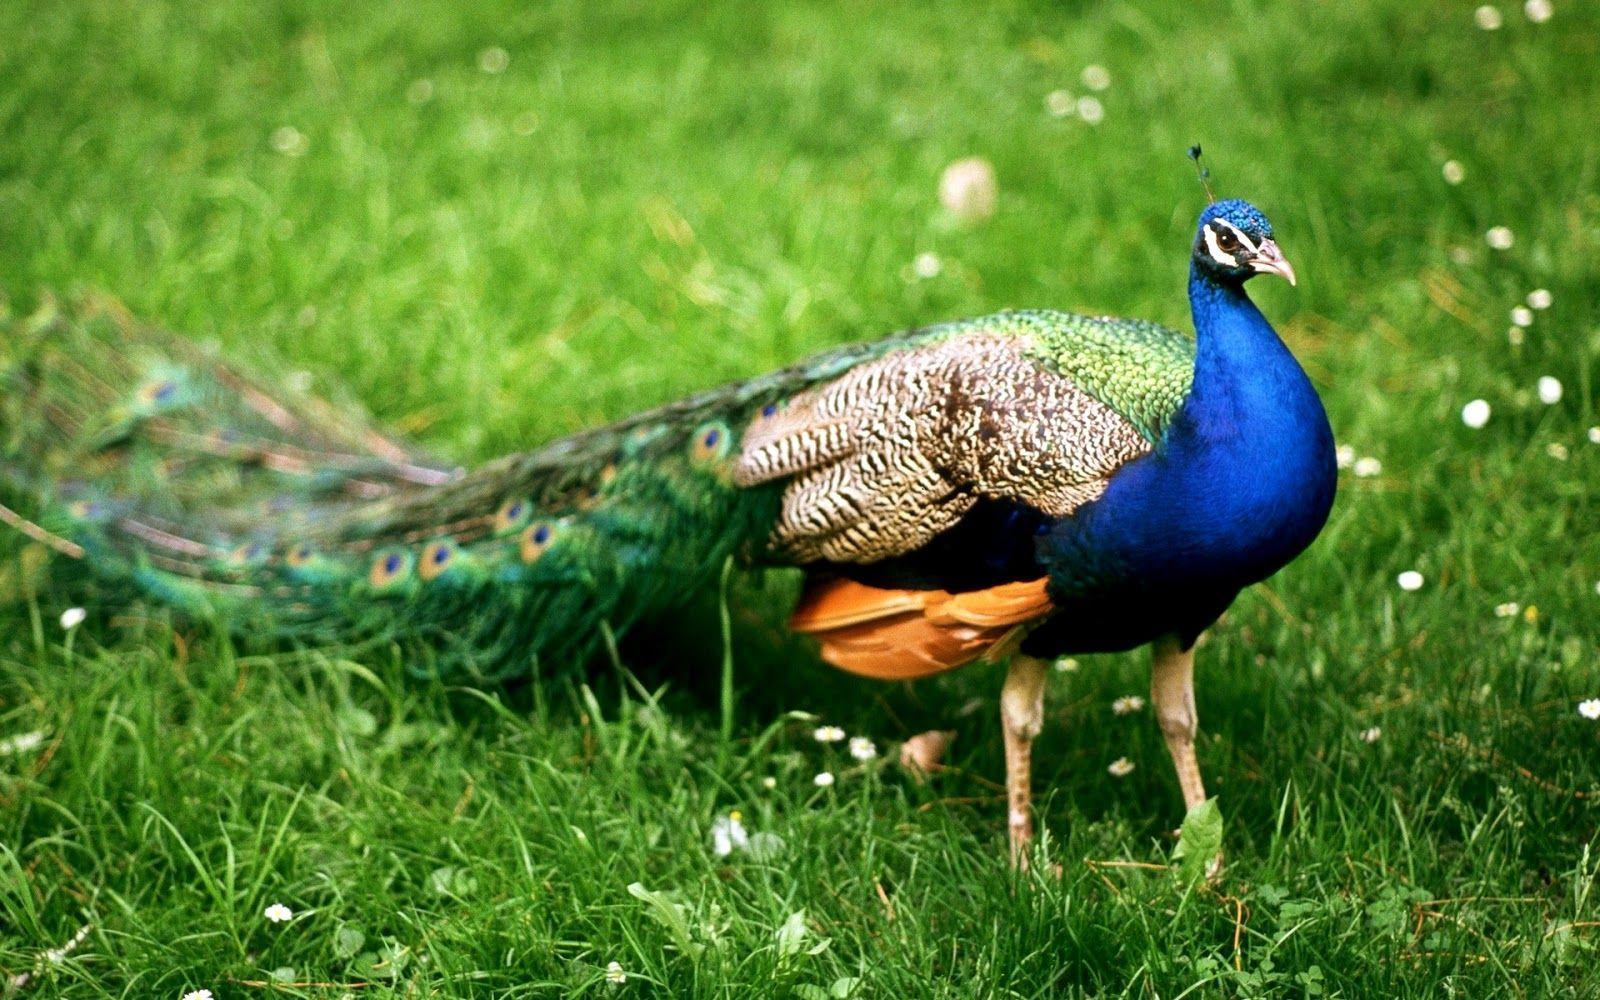 Peacock Image. Picture. Wallpaper & Photo Download